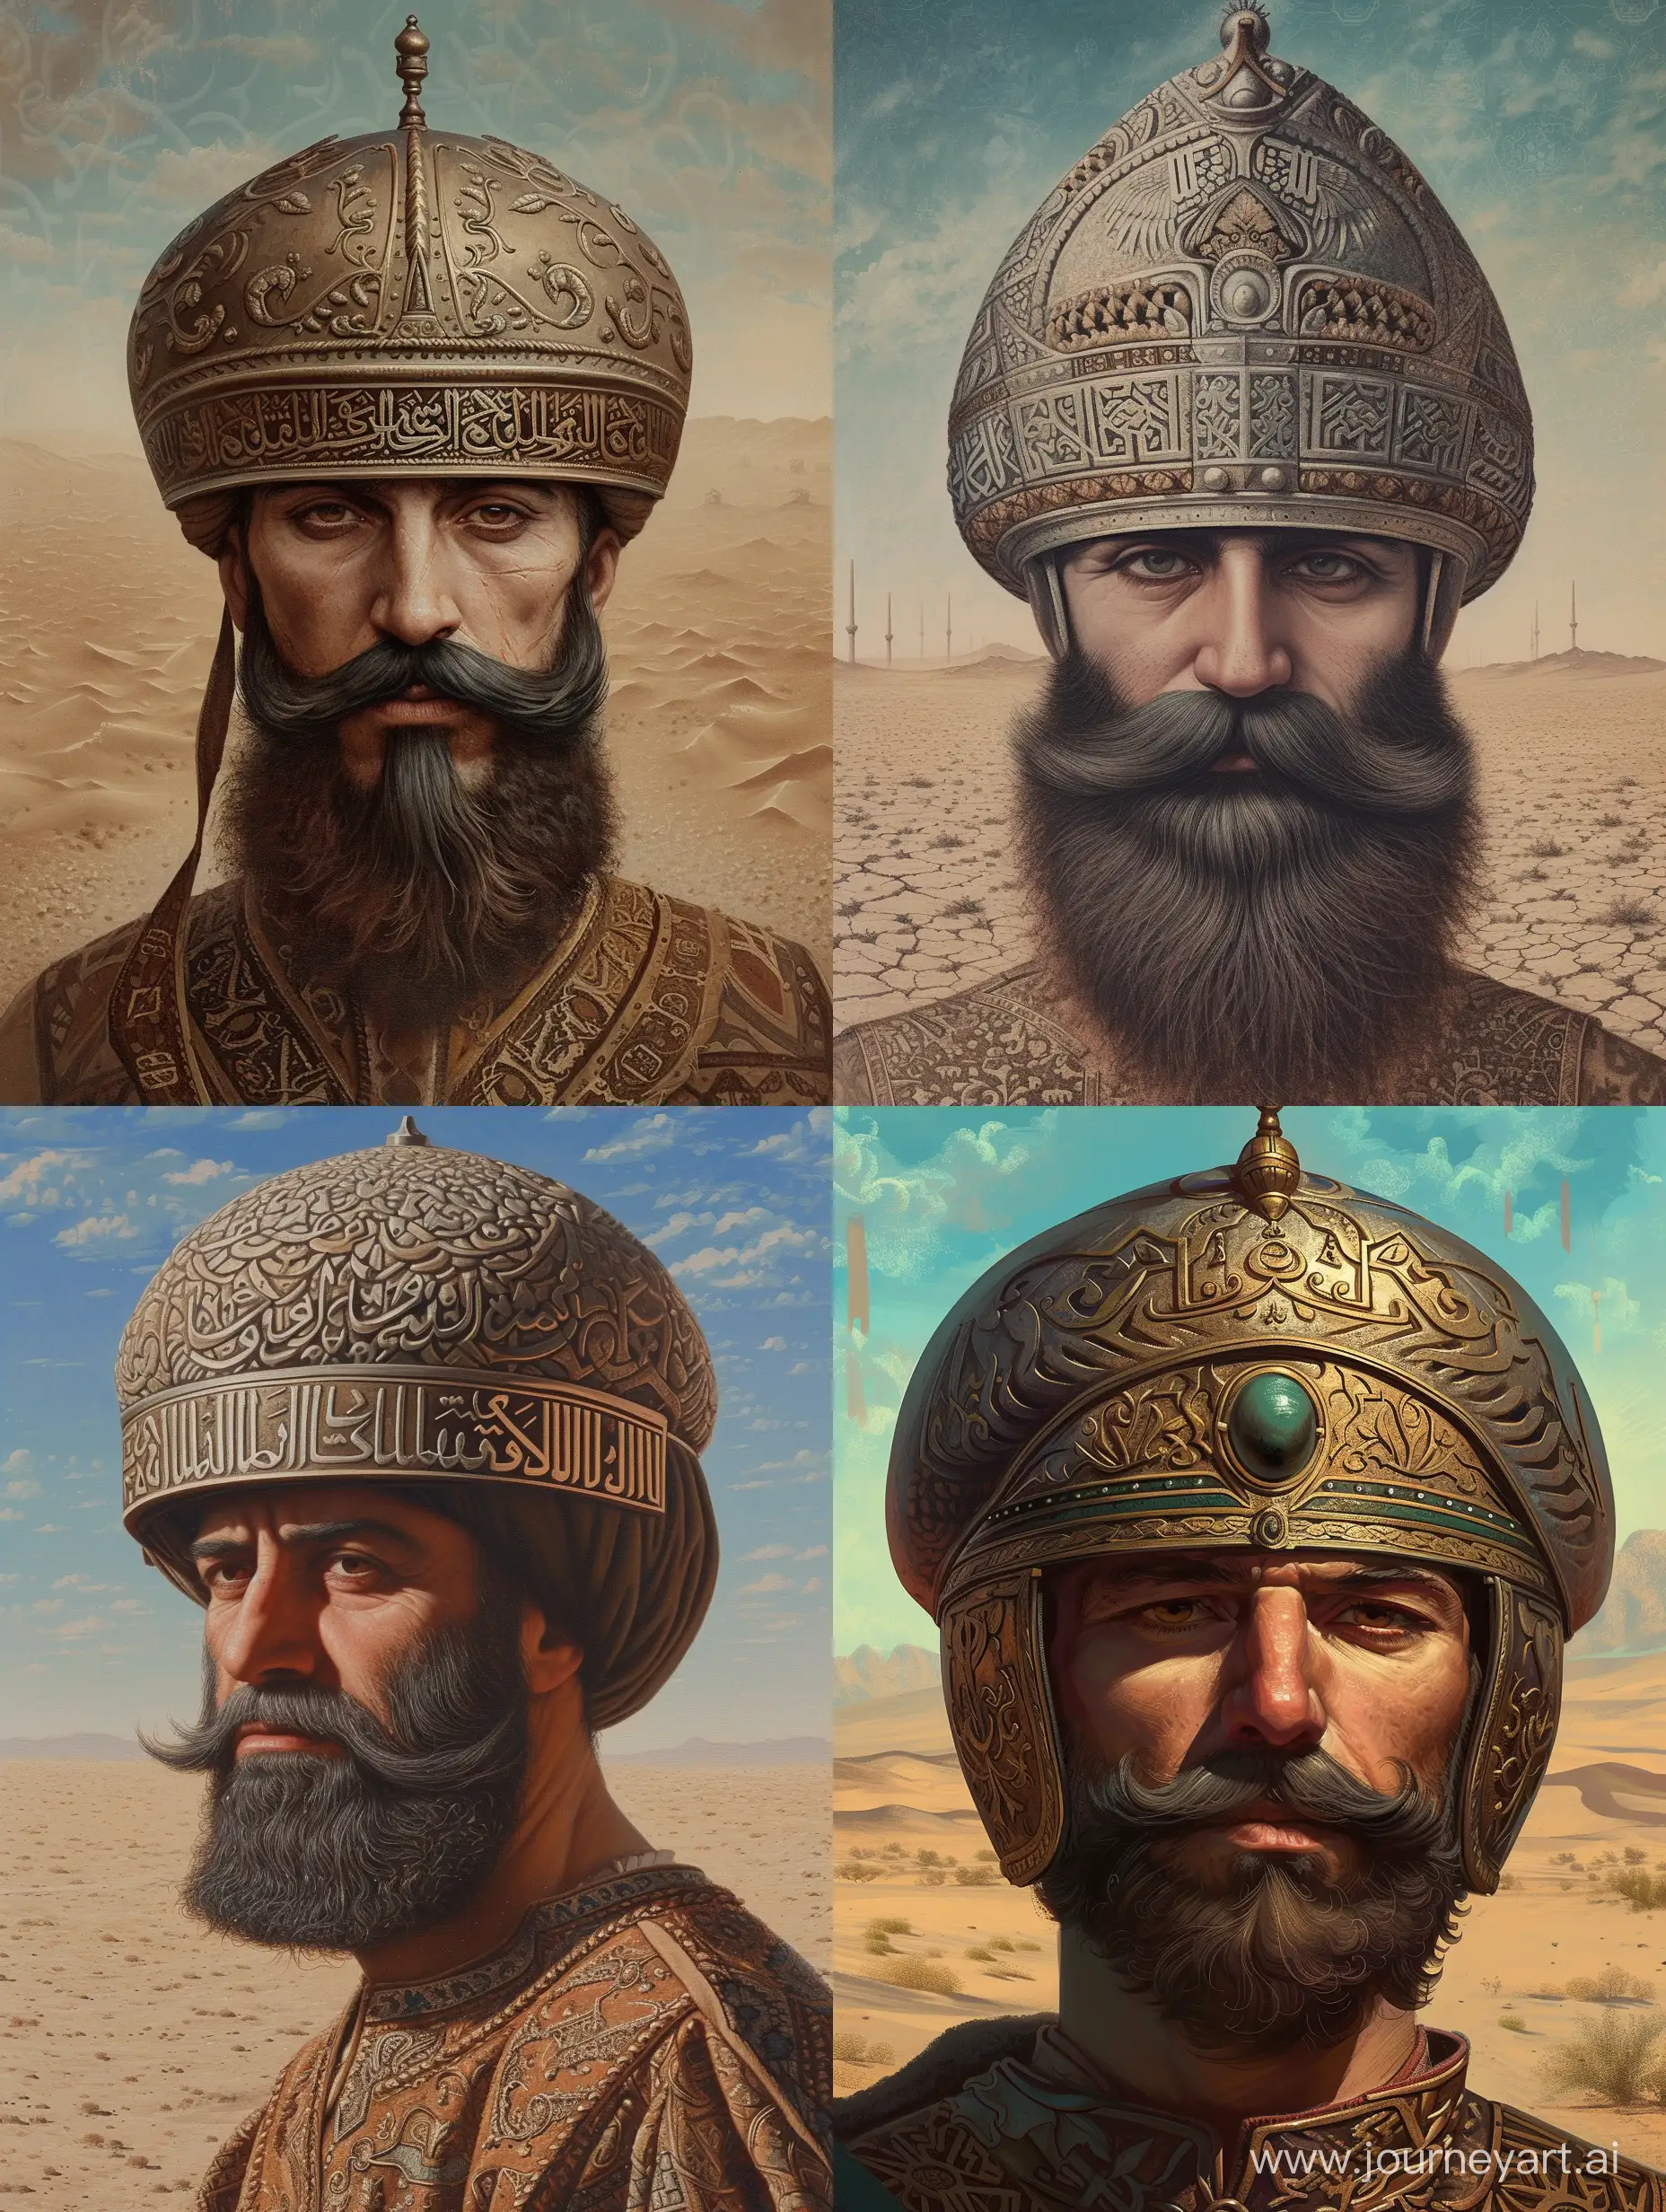 Portrait of an Iranian man, with a little thick van dyke beard, thicker mustache than his beard, wearing an ottoman helmet with intricate ottoman carvings. The background is a desert